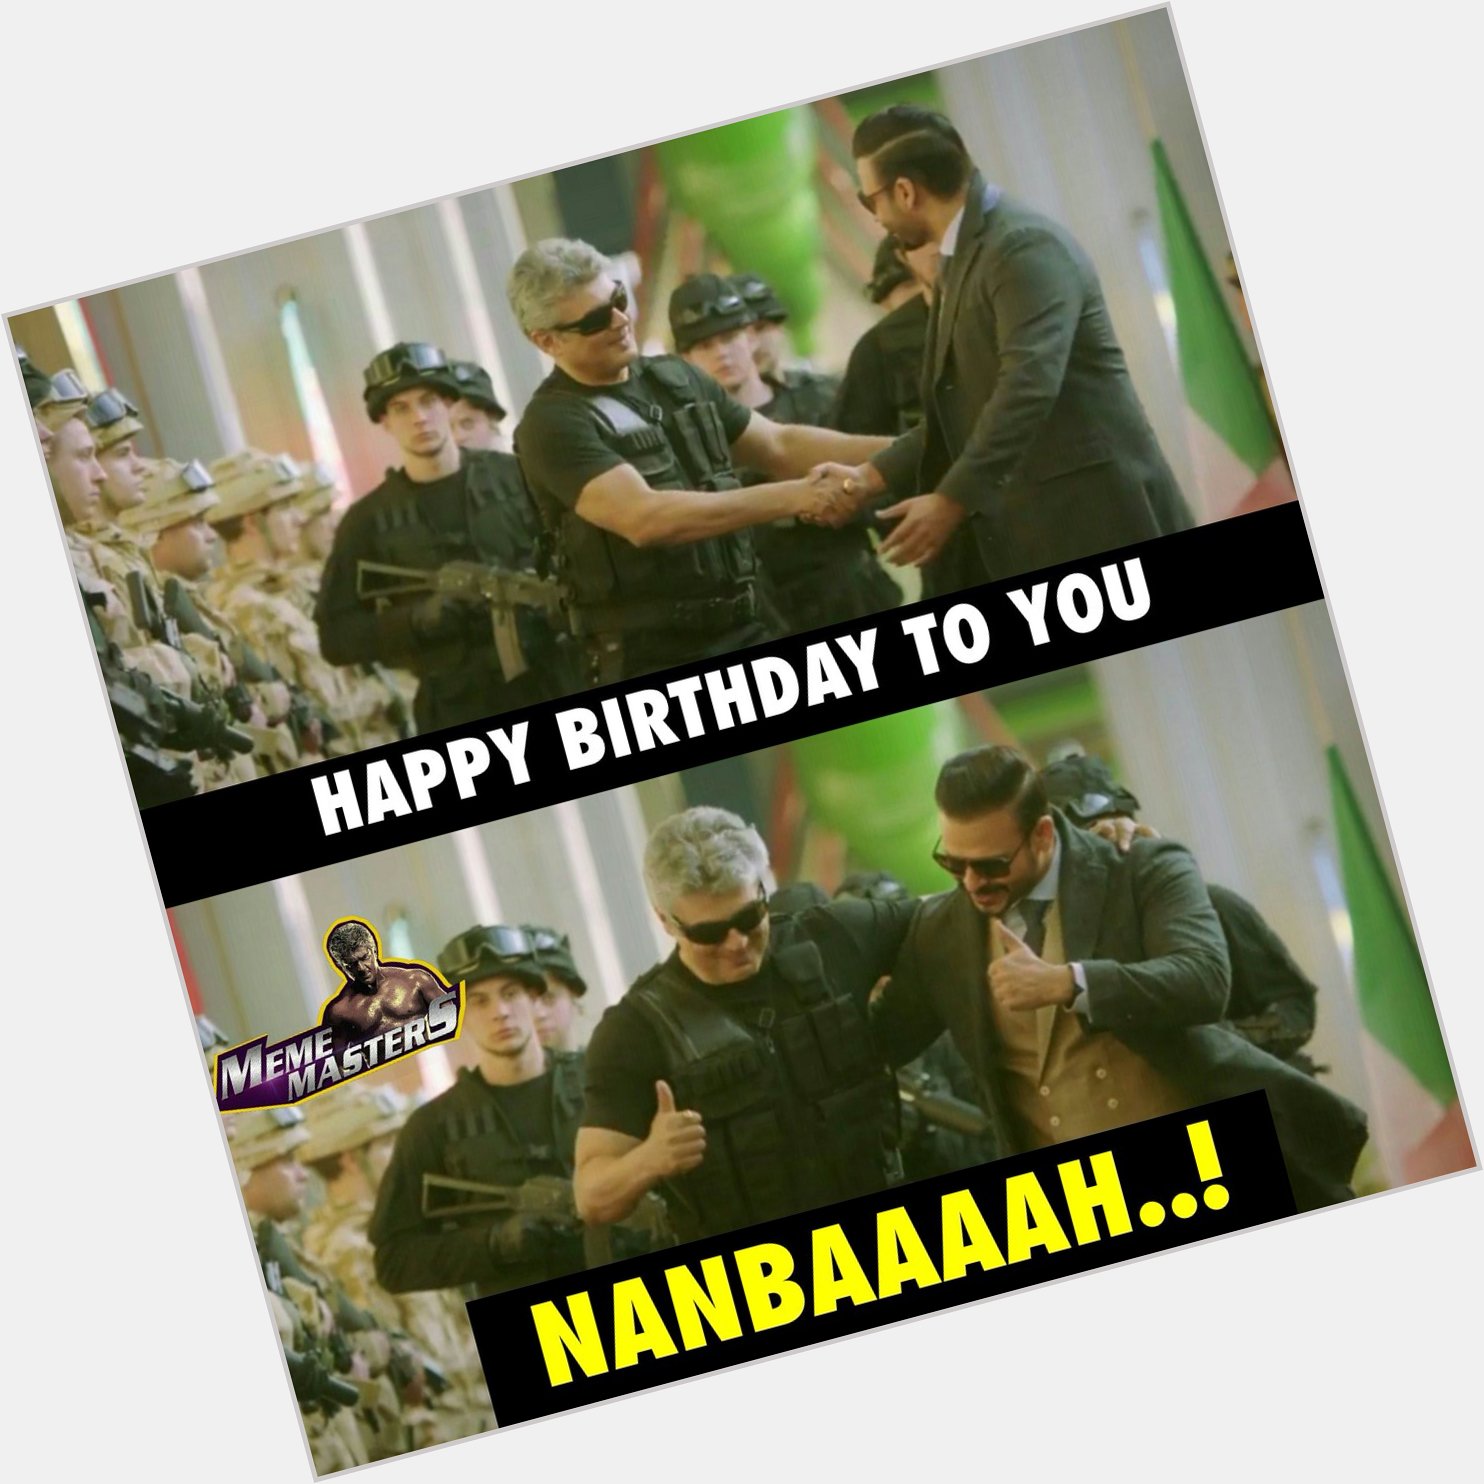 Happy birthday nanba.. Have a successful year ahead ...
Wishes from Loyal Thala Ajith fans 